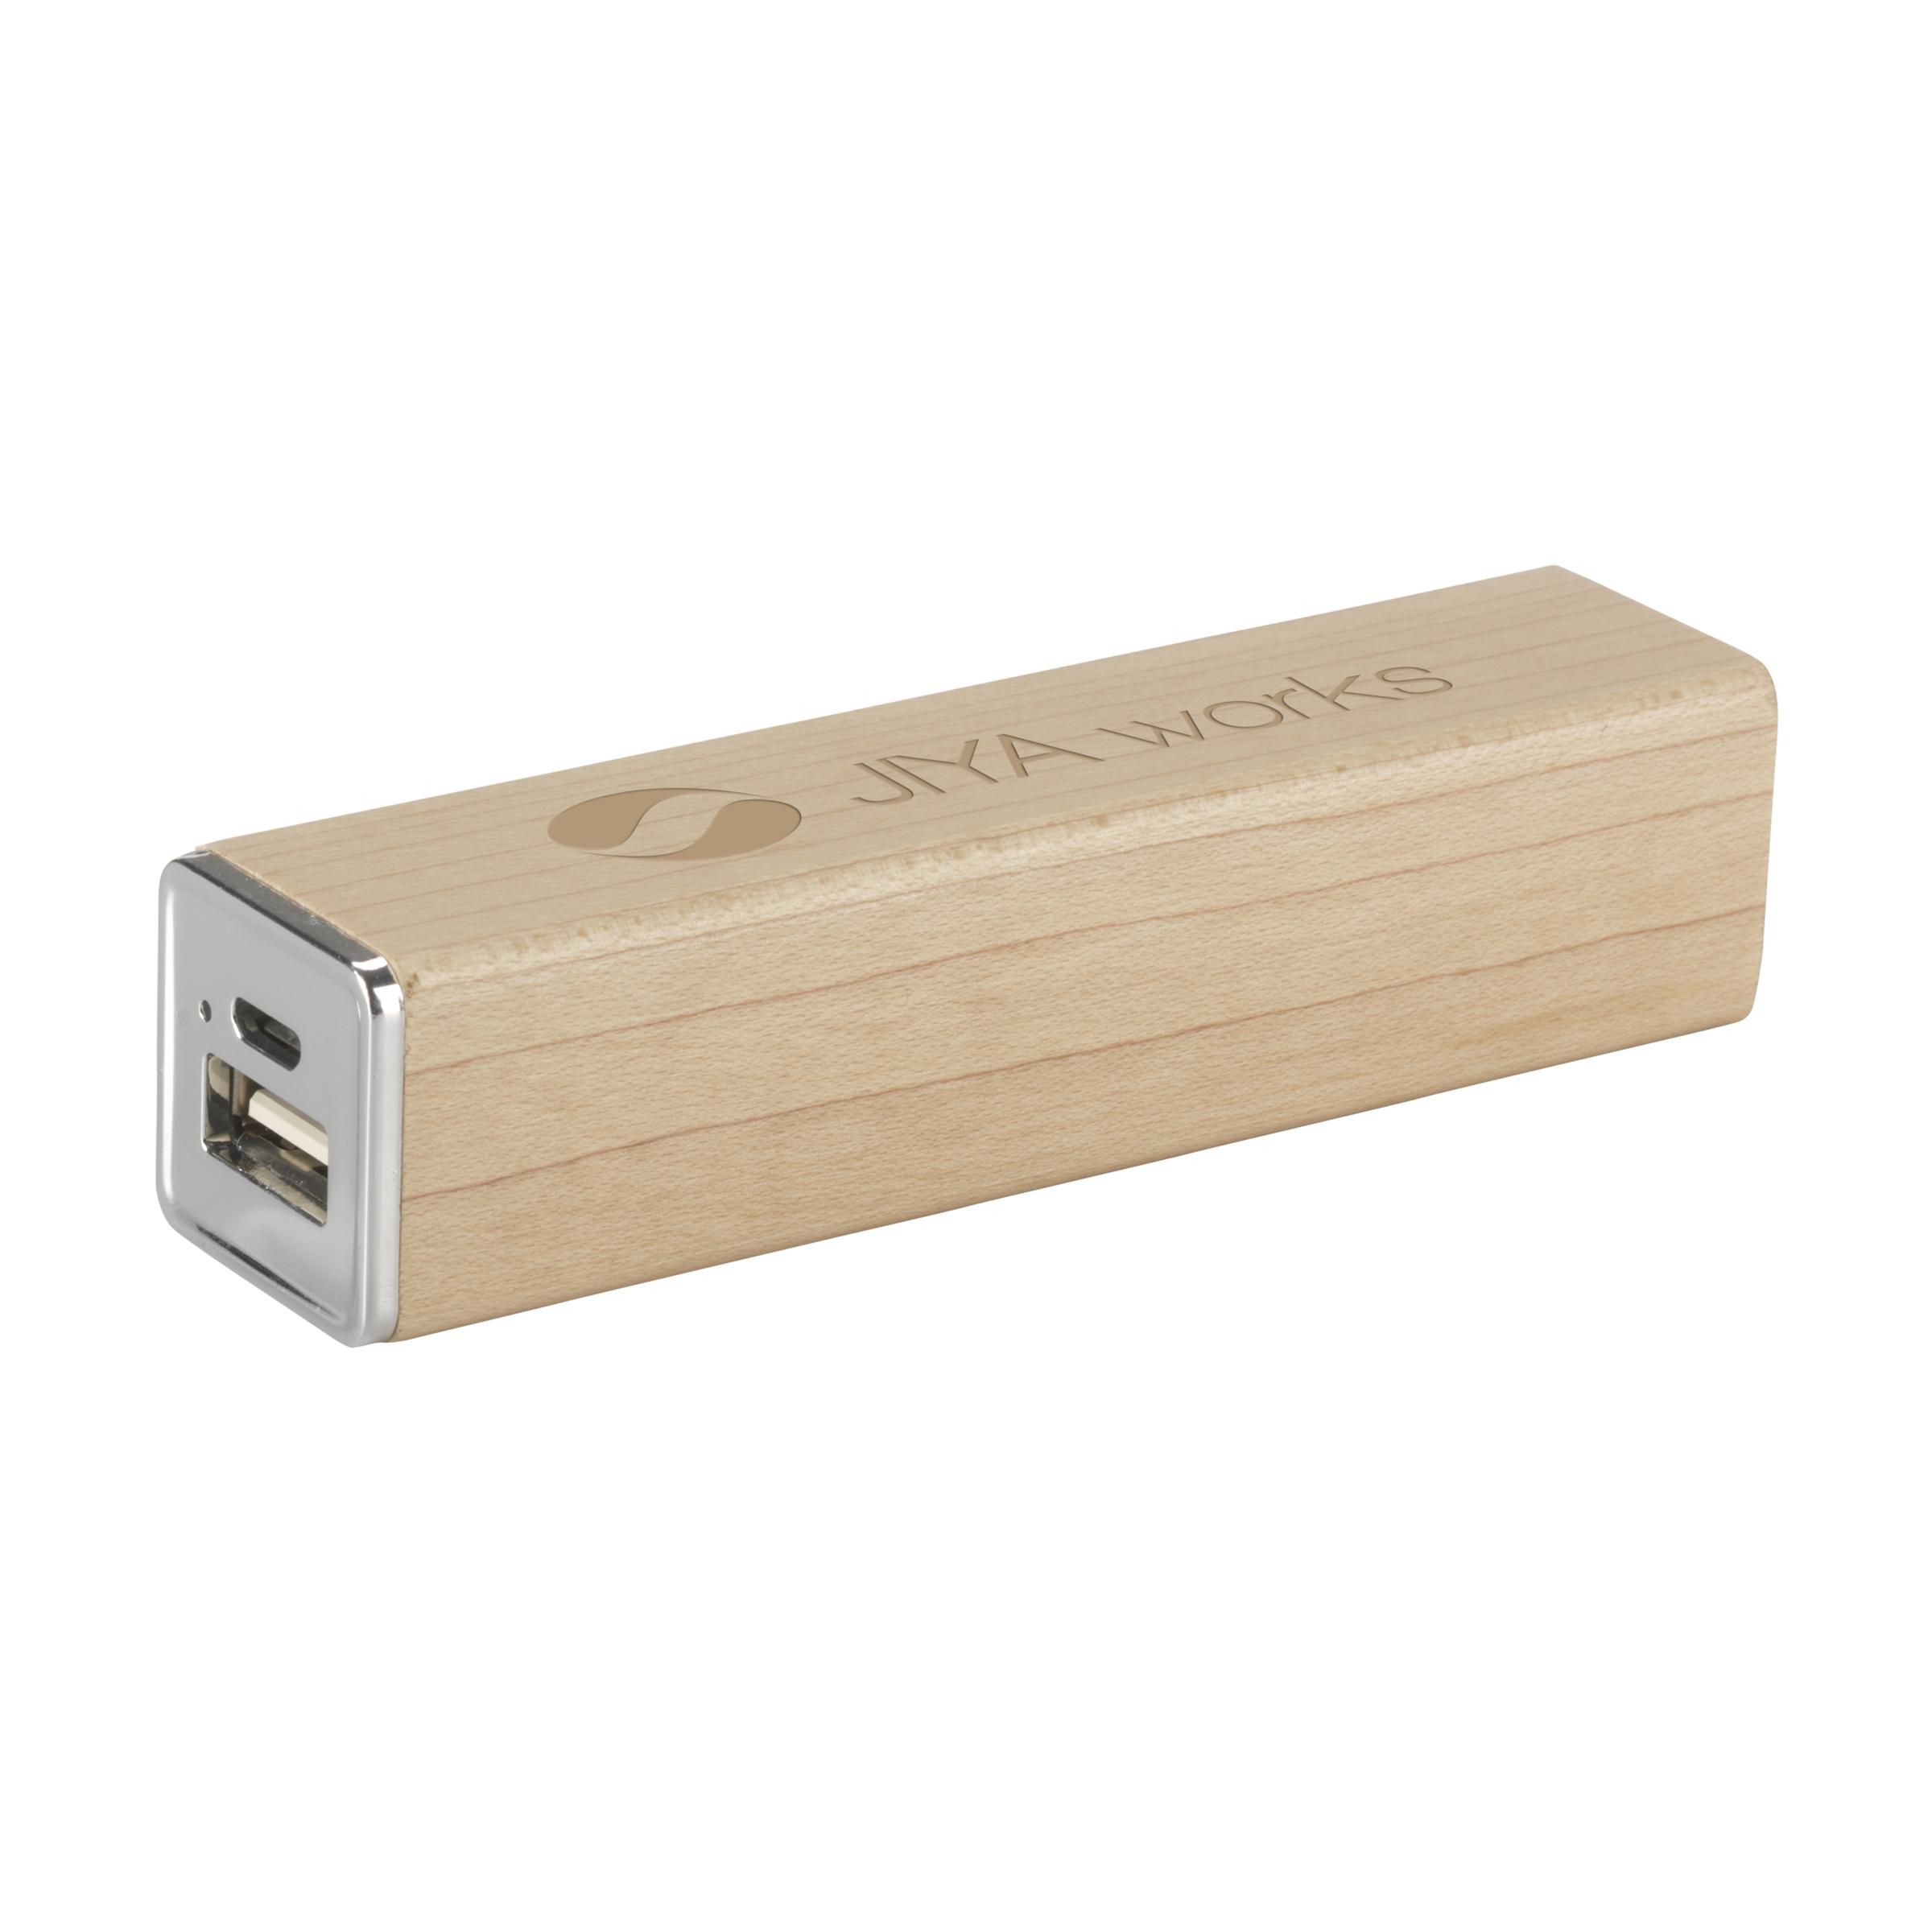 Branded Powercharger2000Wood Powerbank Light-Brown